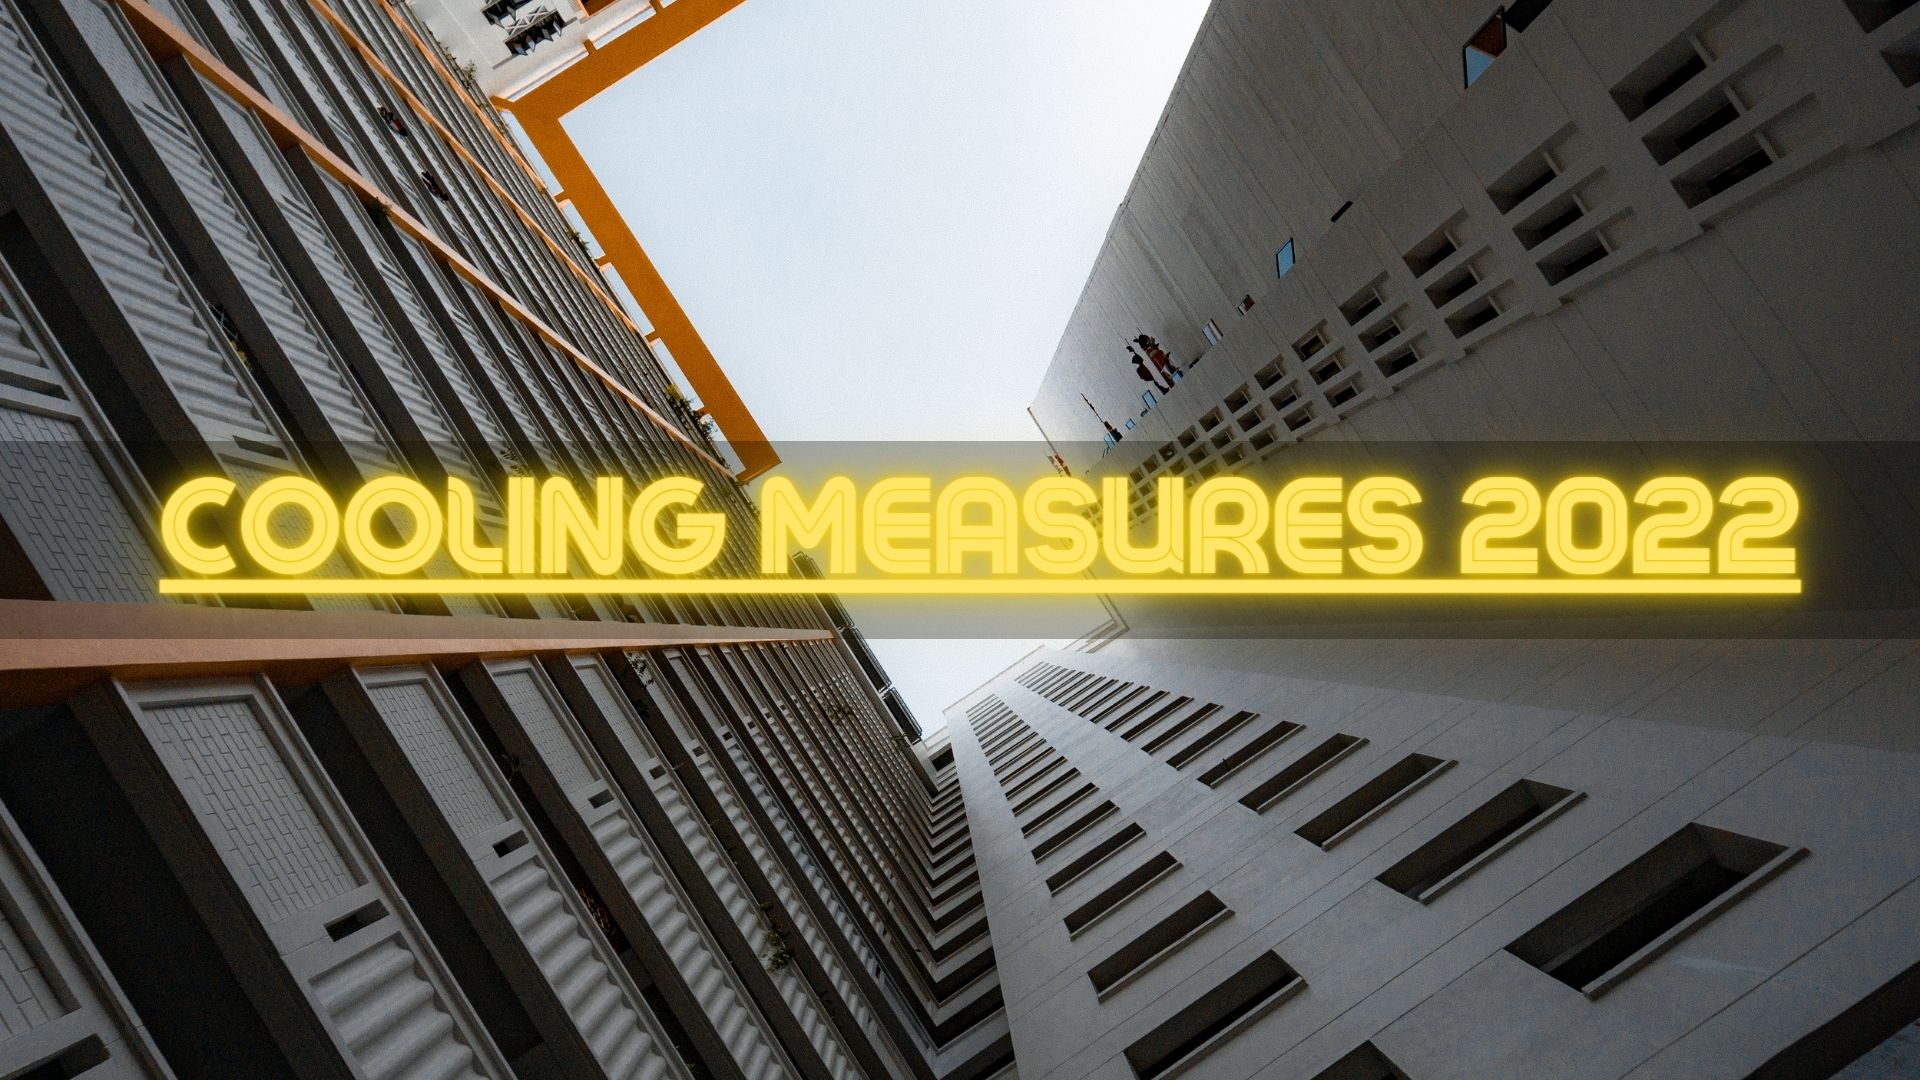 Cooling Measures 2022 to moderate housing demand in an environment of rising interest rates